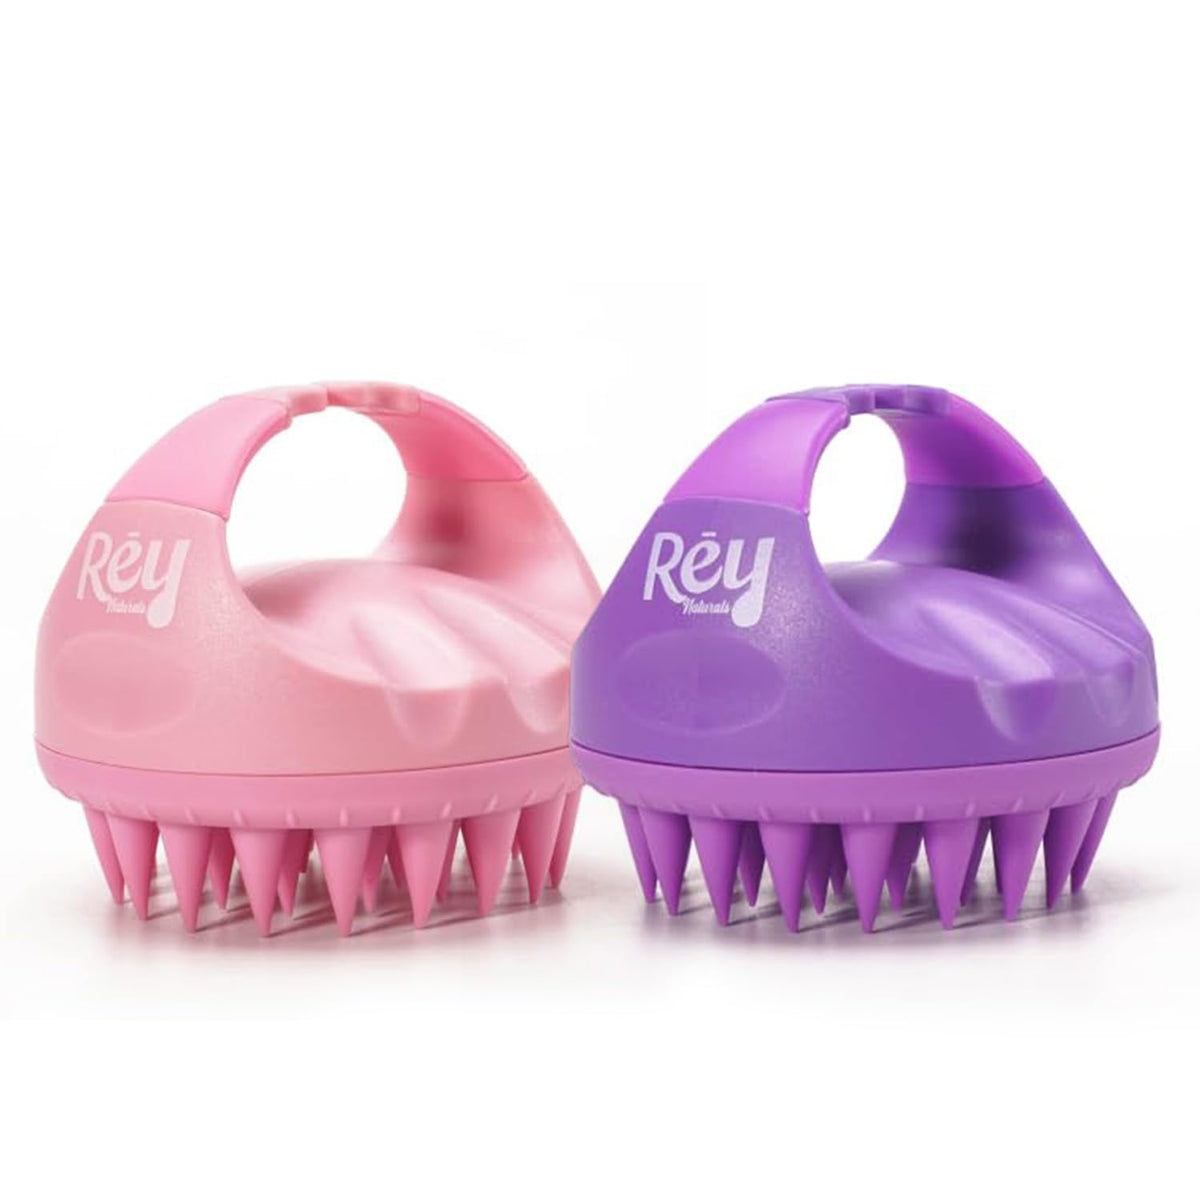 Rey Naturals Hair Scalp Massager Shampoo Brush - Hair Growth, Scalp Care, and Relaxation - Soft Bristles for Gentle Massage - Pink Color (Pink & Purple)